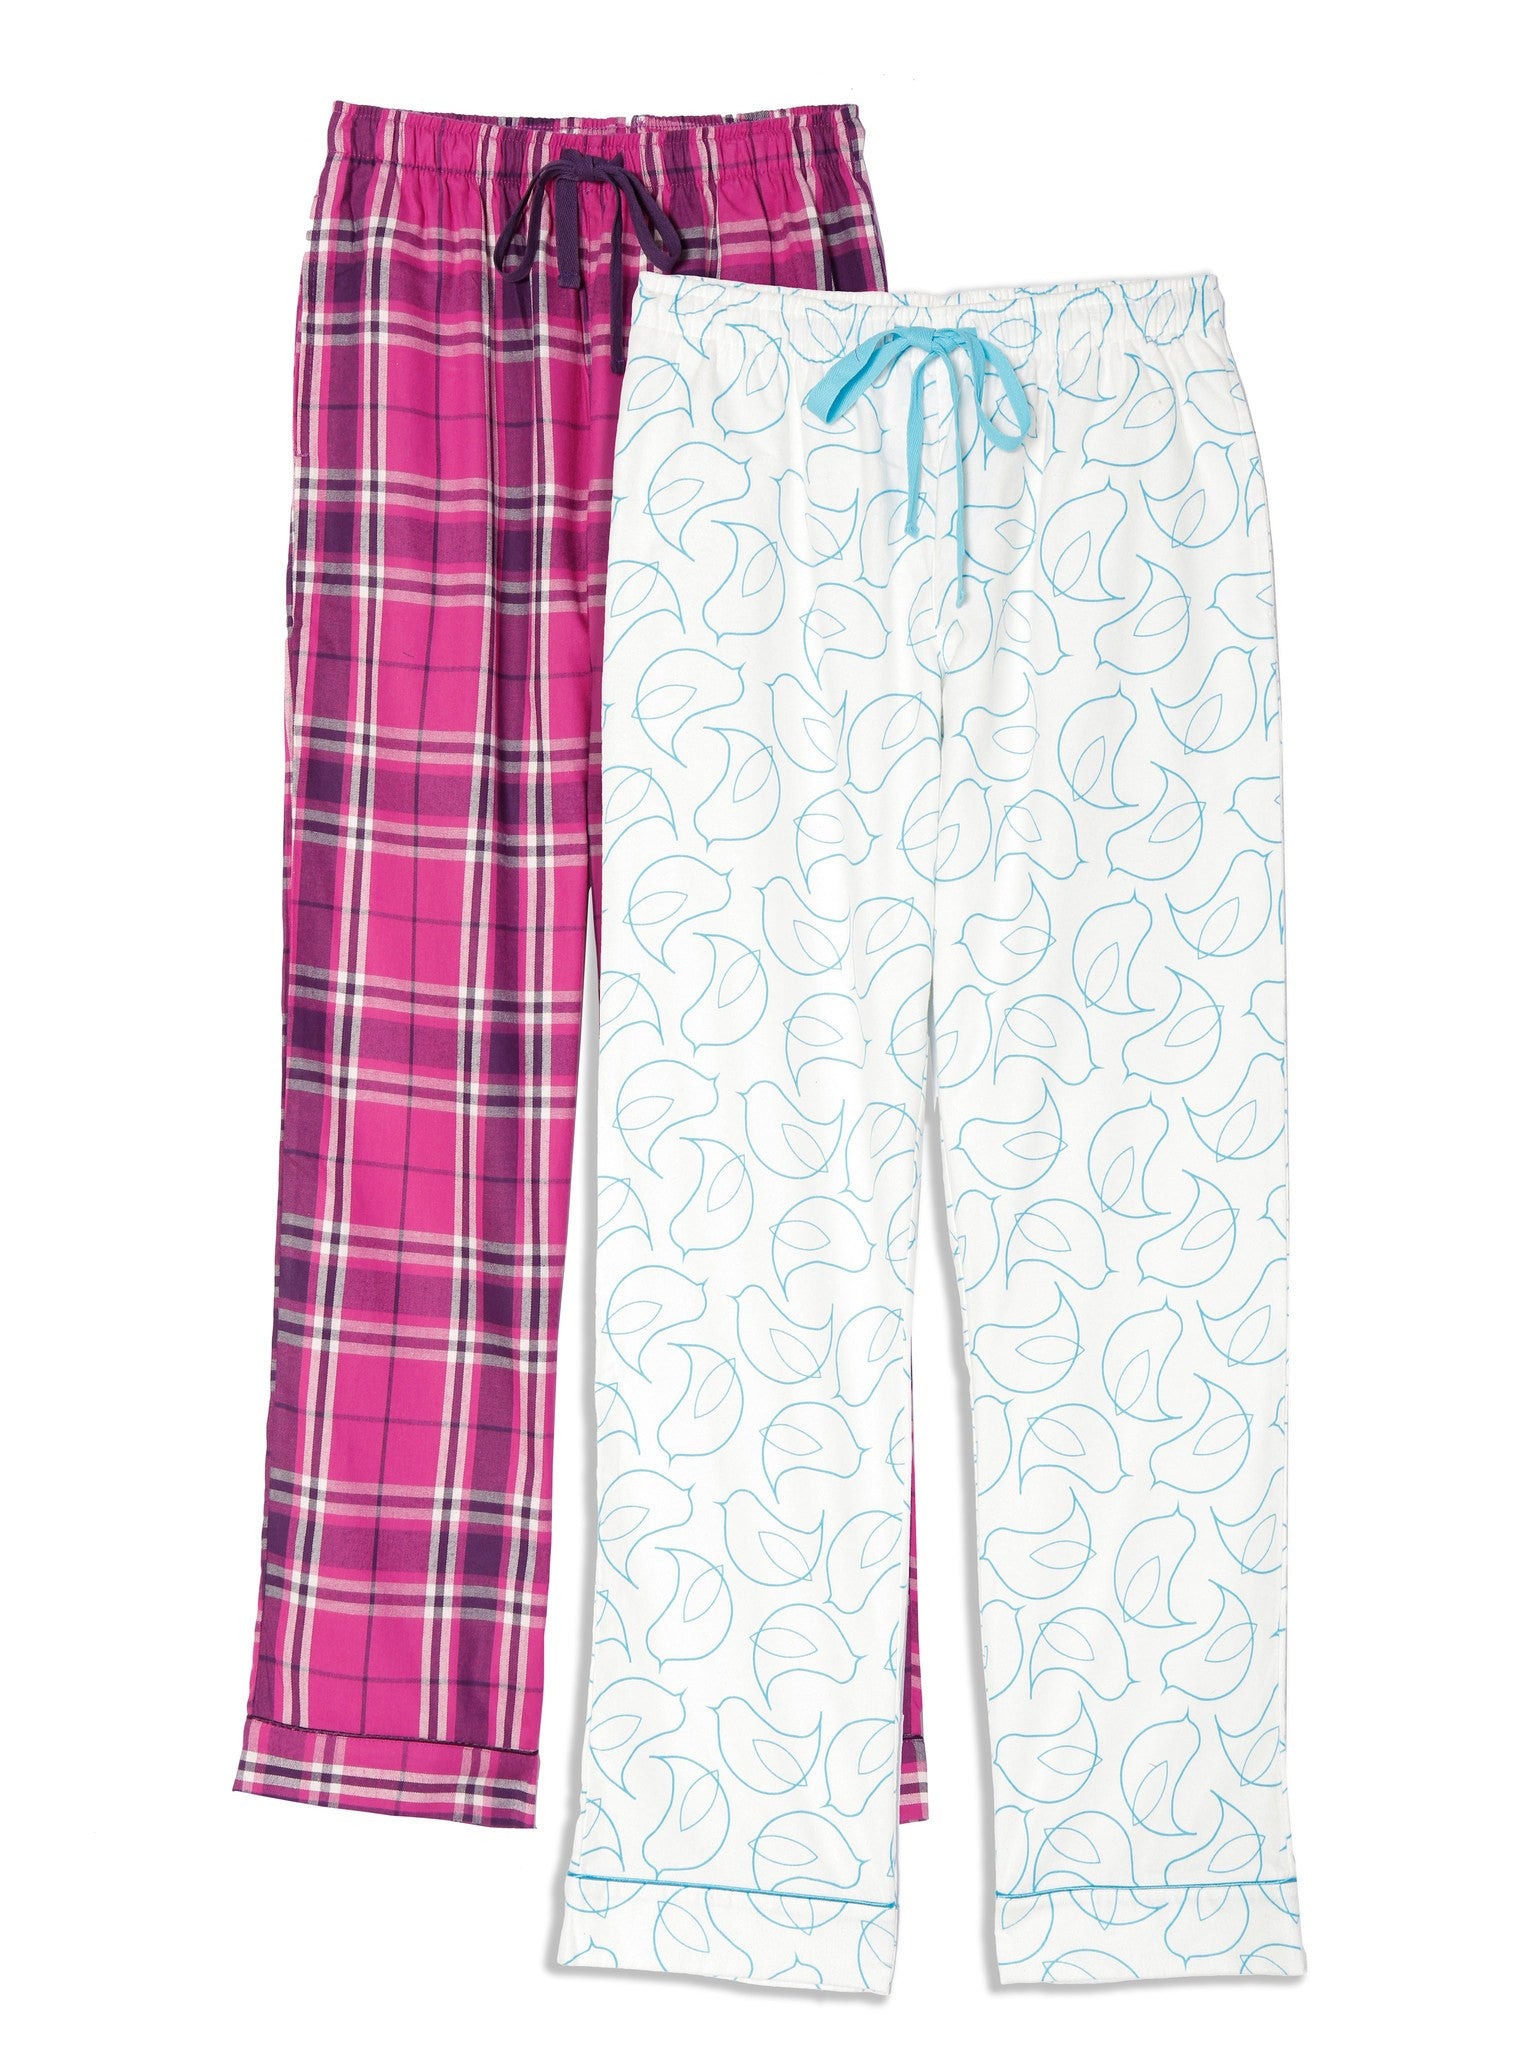 Women's Cotton Flannel Lounge Pants (2 Pack) - Relaxed Fit – Noble Mount